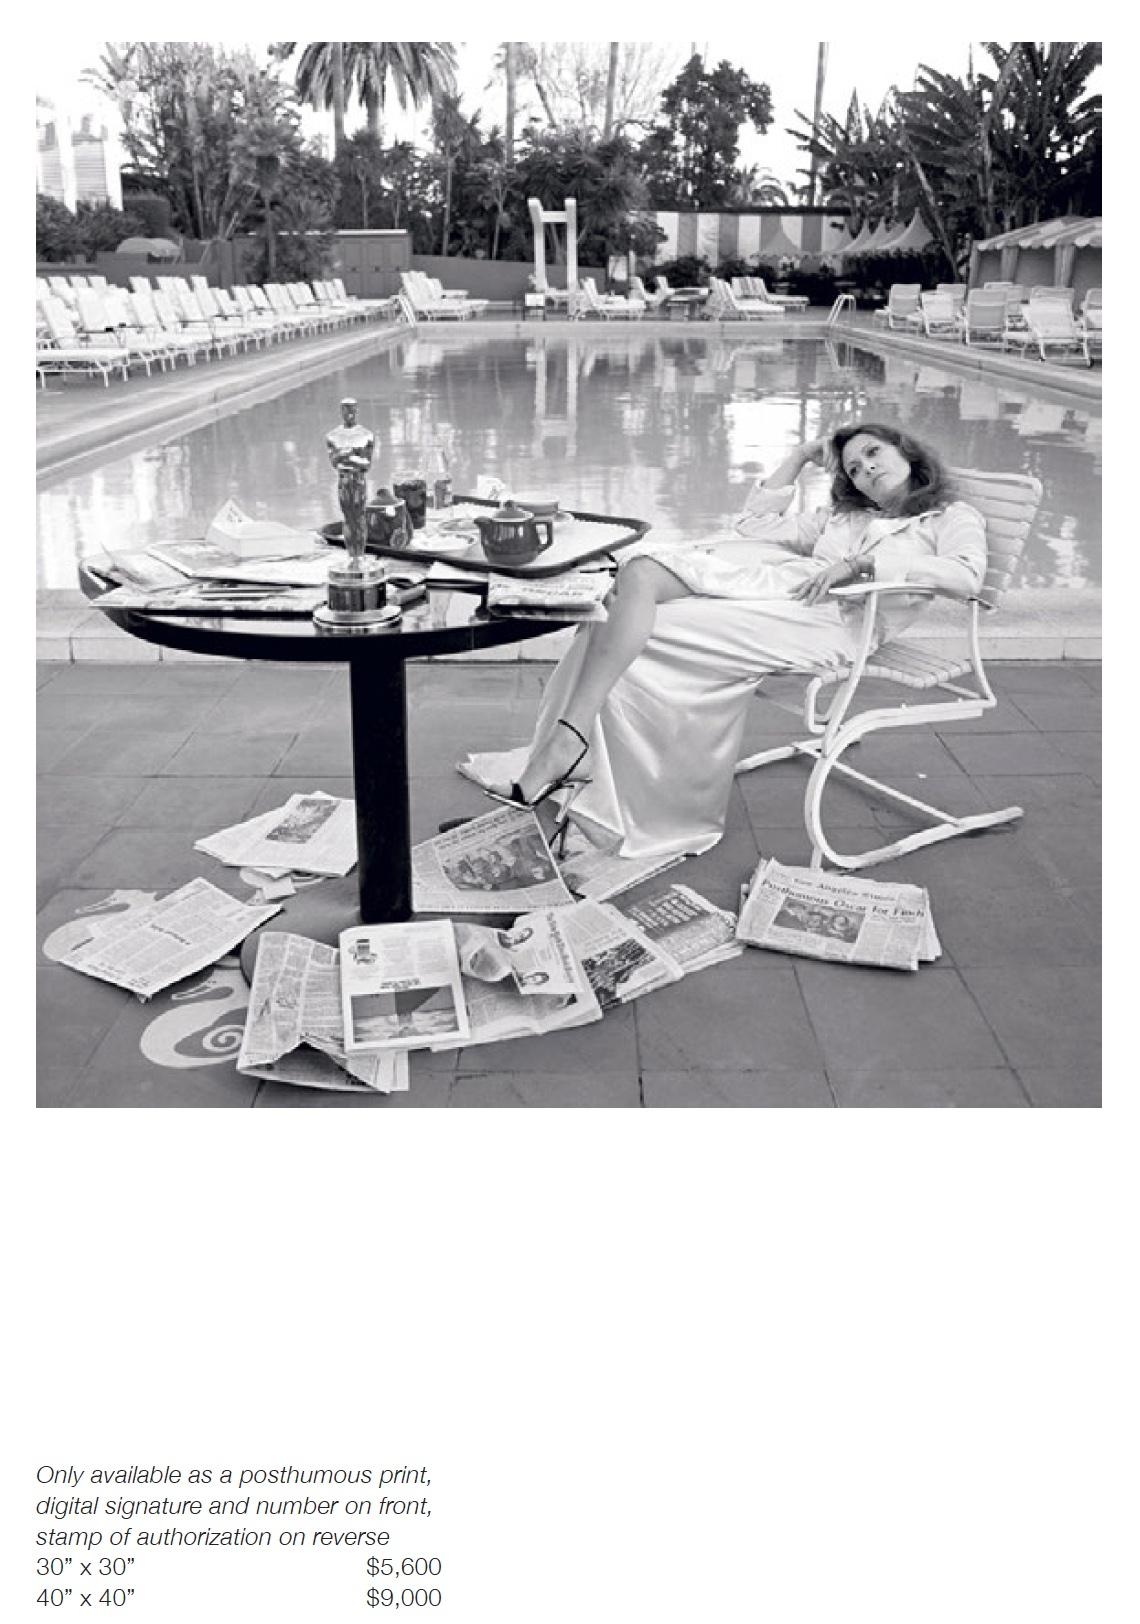 Terry O'Neill 'Faye Dunaway at the Beverly Hills Hotel' - Édition noir et blanc en vente 1